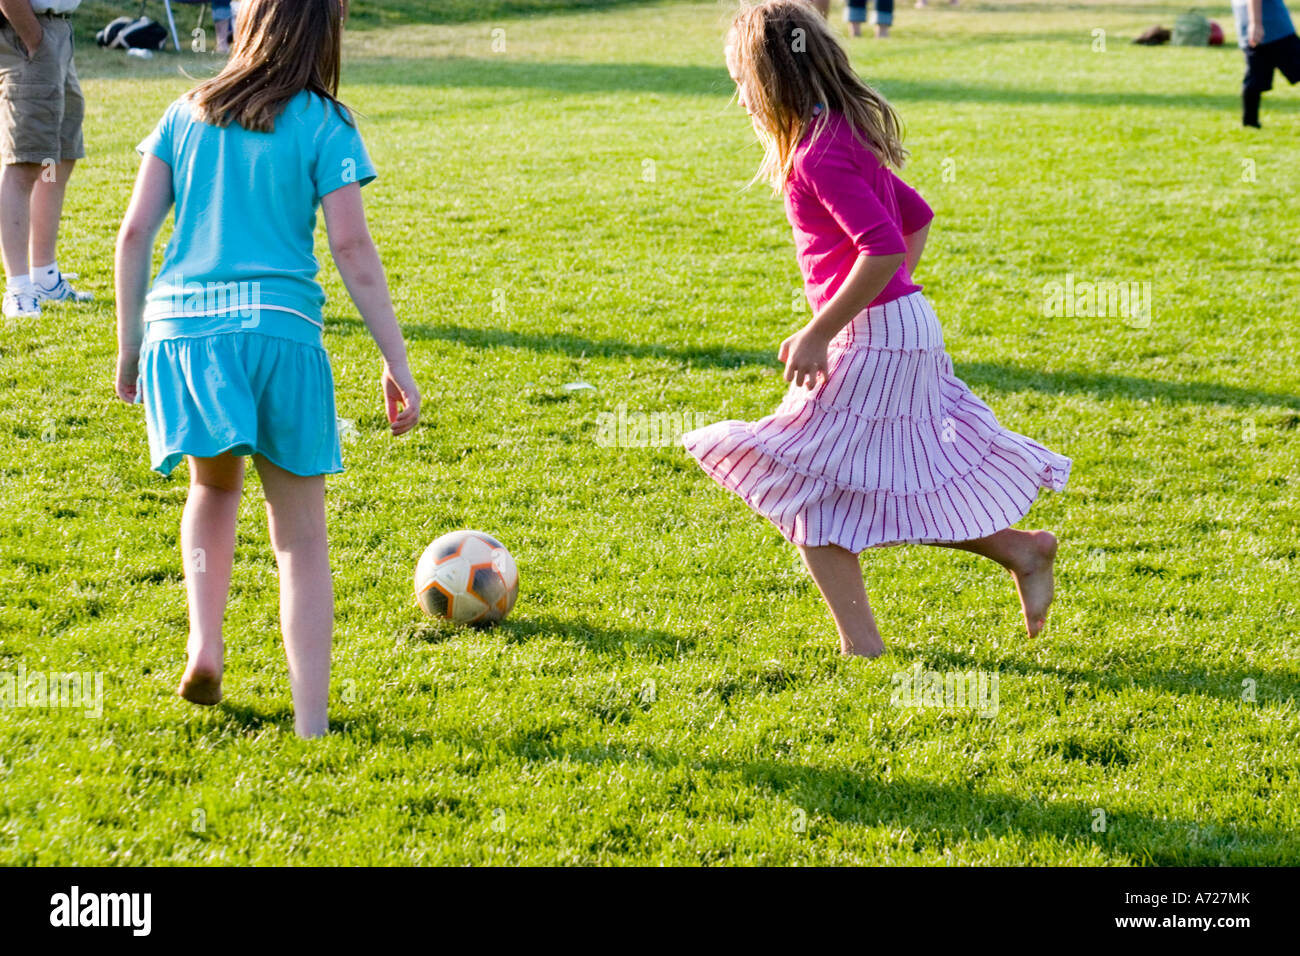 Girls age 11 playing soccer barefooted in skirts. Carondelet Field Expo School St Paul Minnesota USA Stock Photo